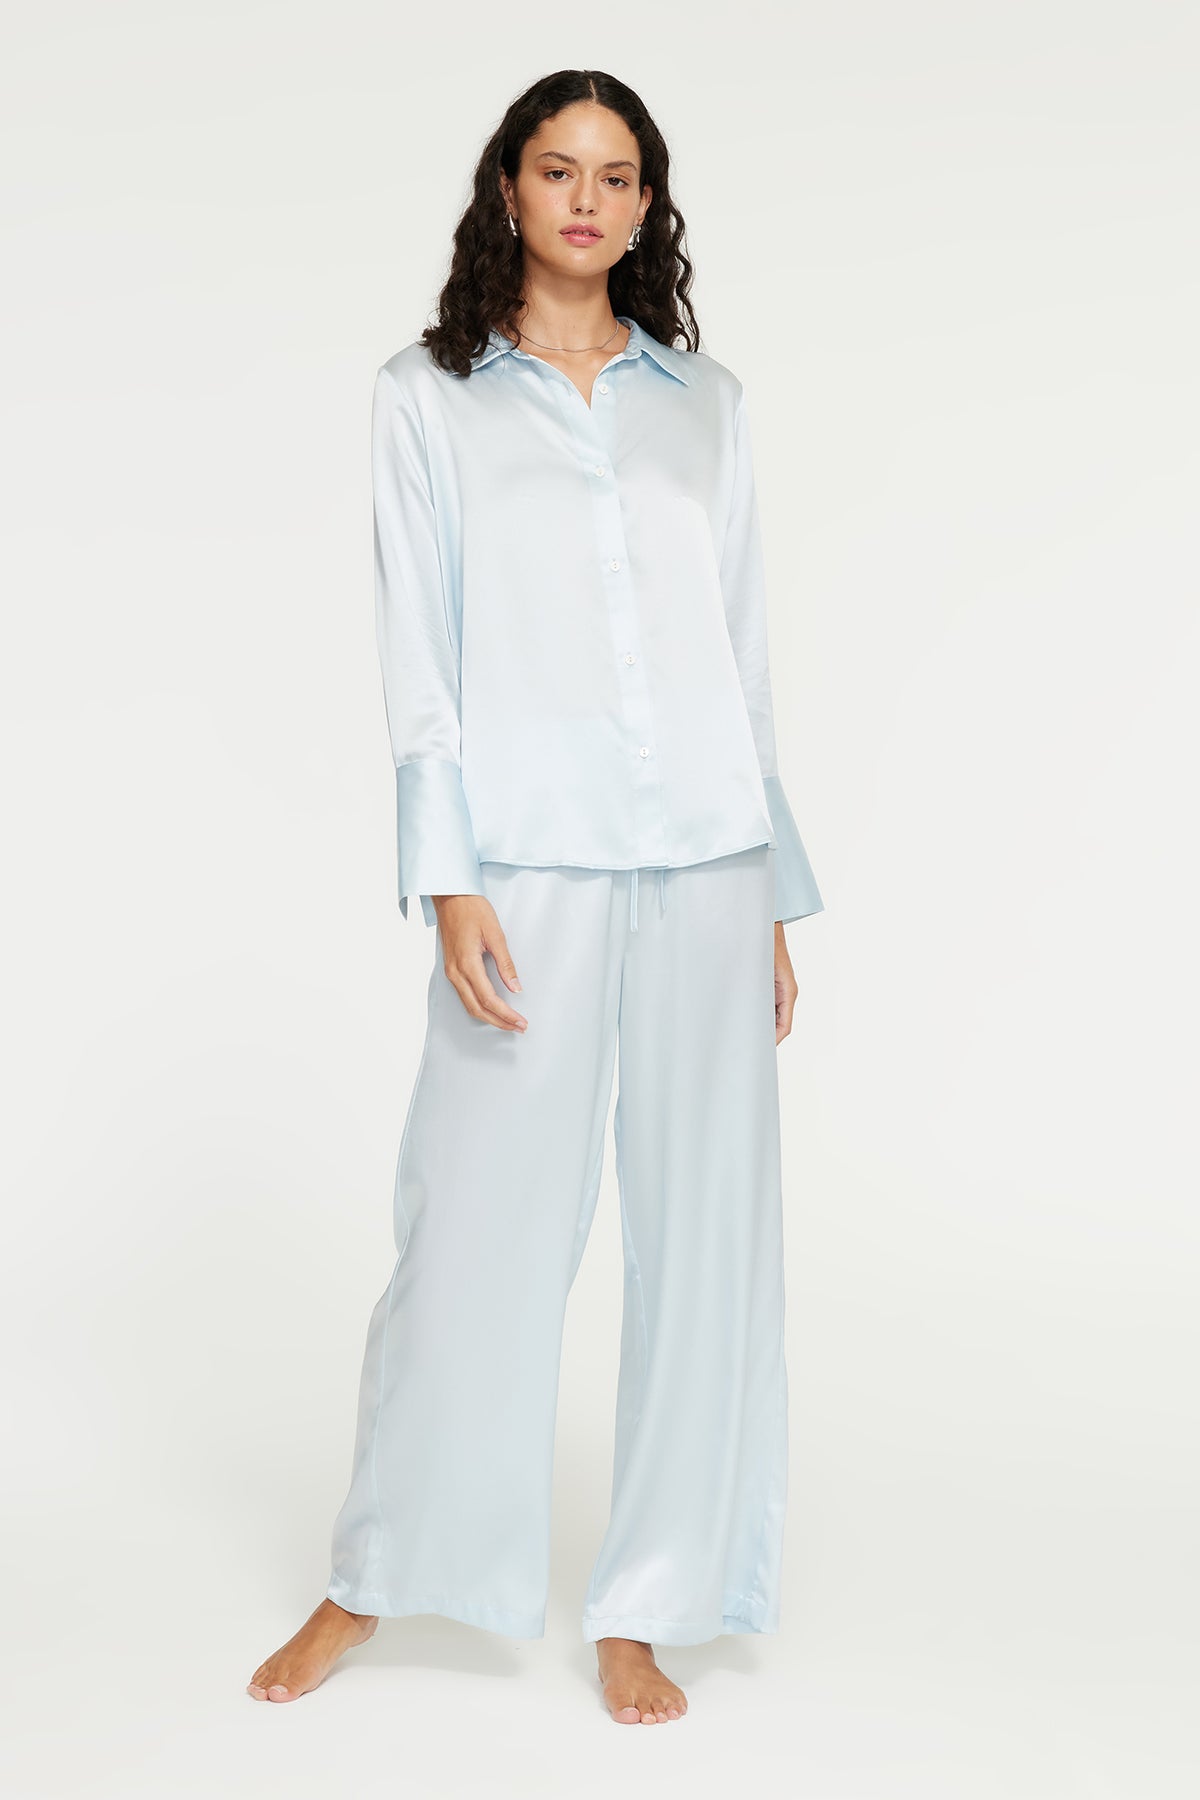 The Isla Shirt By GINIA In Ice Blue